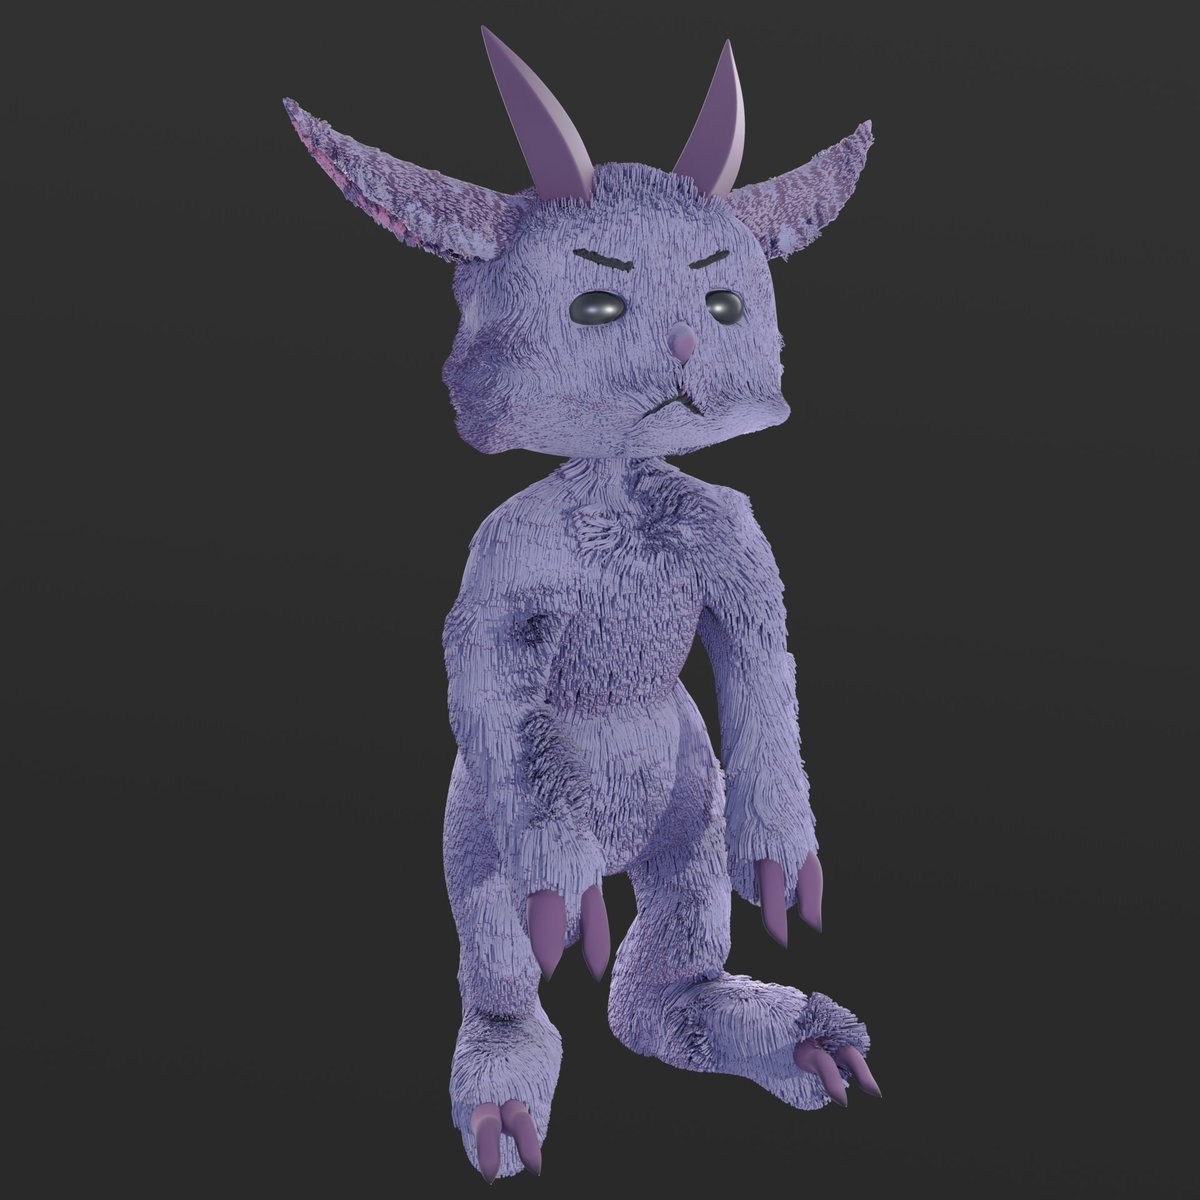 his name is 'shithead'
Character design by @Jarnqk
#furry #b3d #blender #3dart #CGModel #character